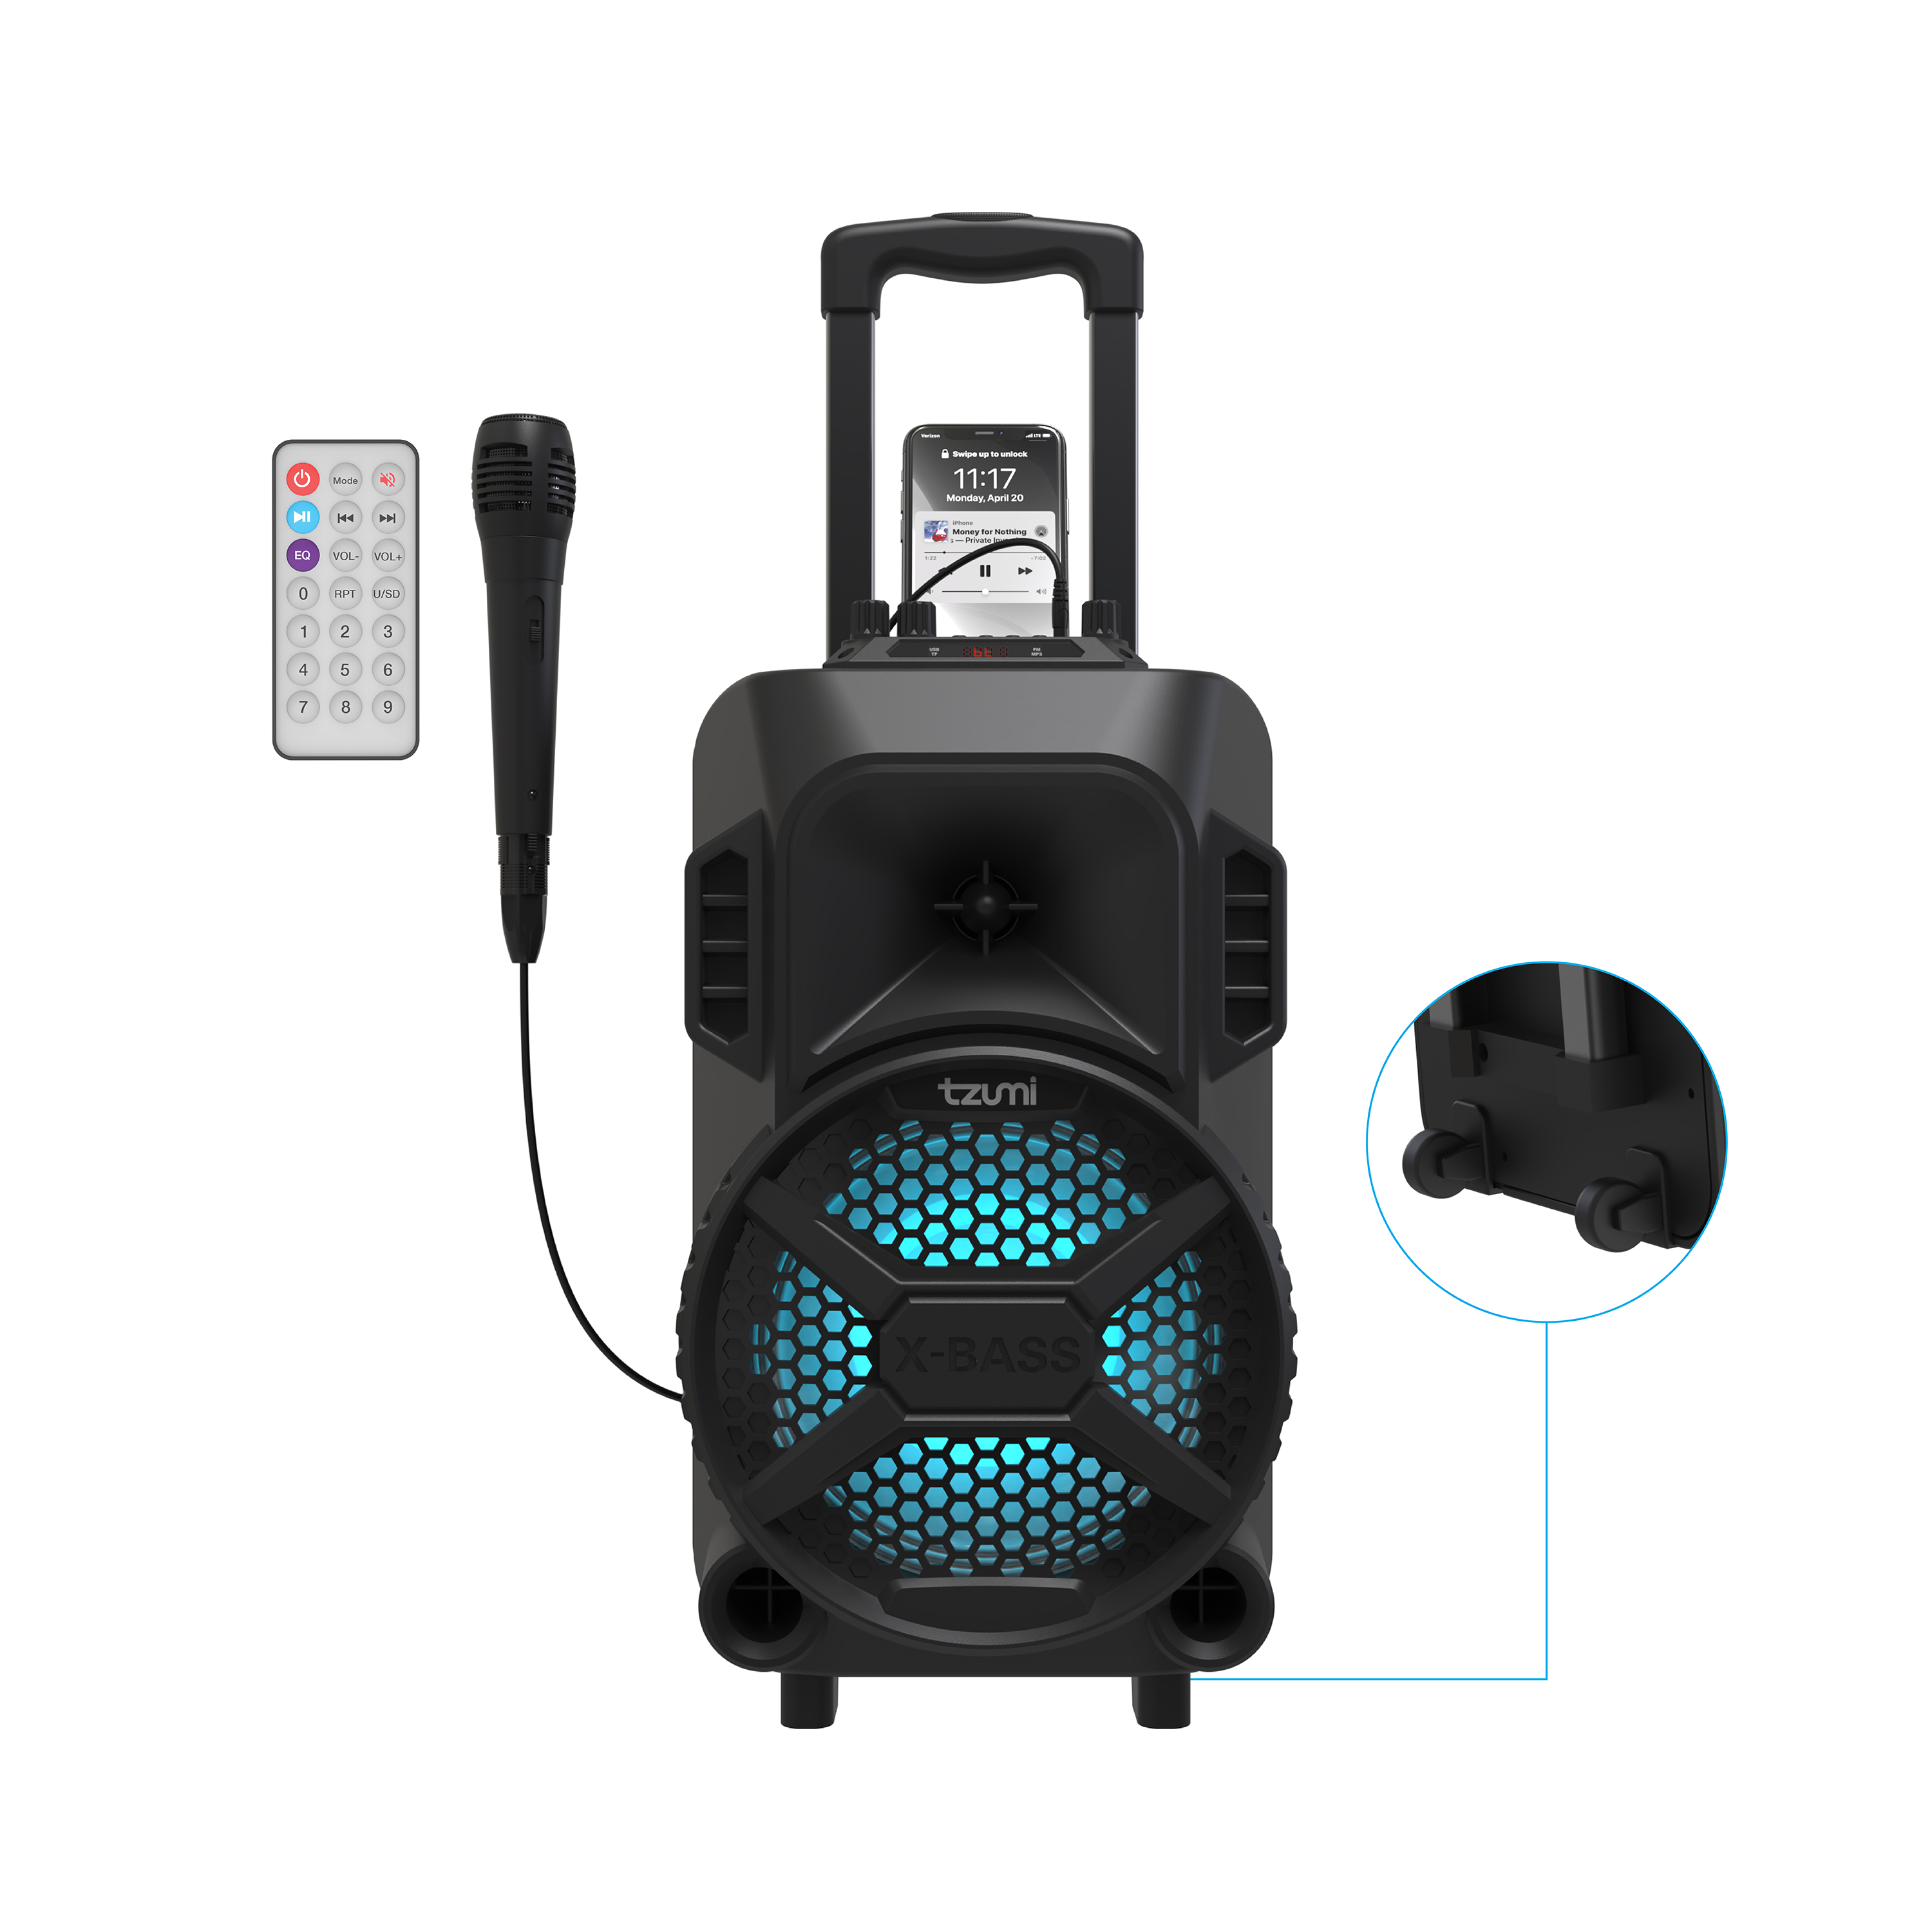 Tzumi MegaBass LED Jobsite Speaker, Rechargeable Bluetooth Party Speaker with 8in. Subwoofer and Microphone, 8.2lbs - image 1 of 11